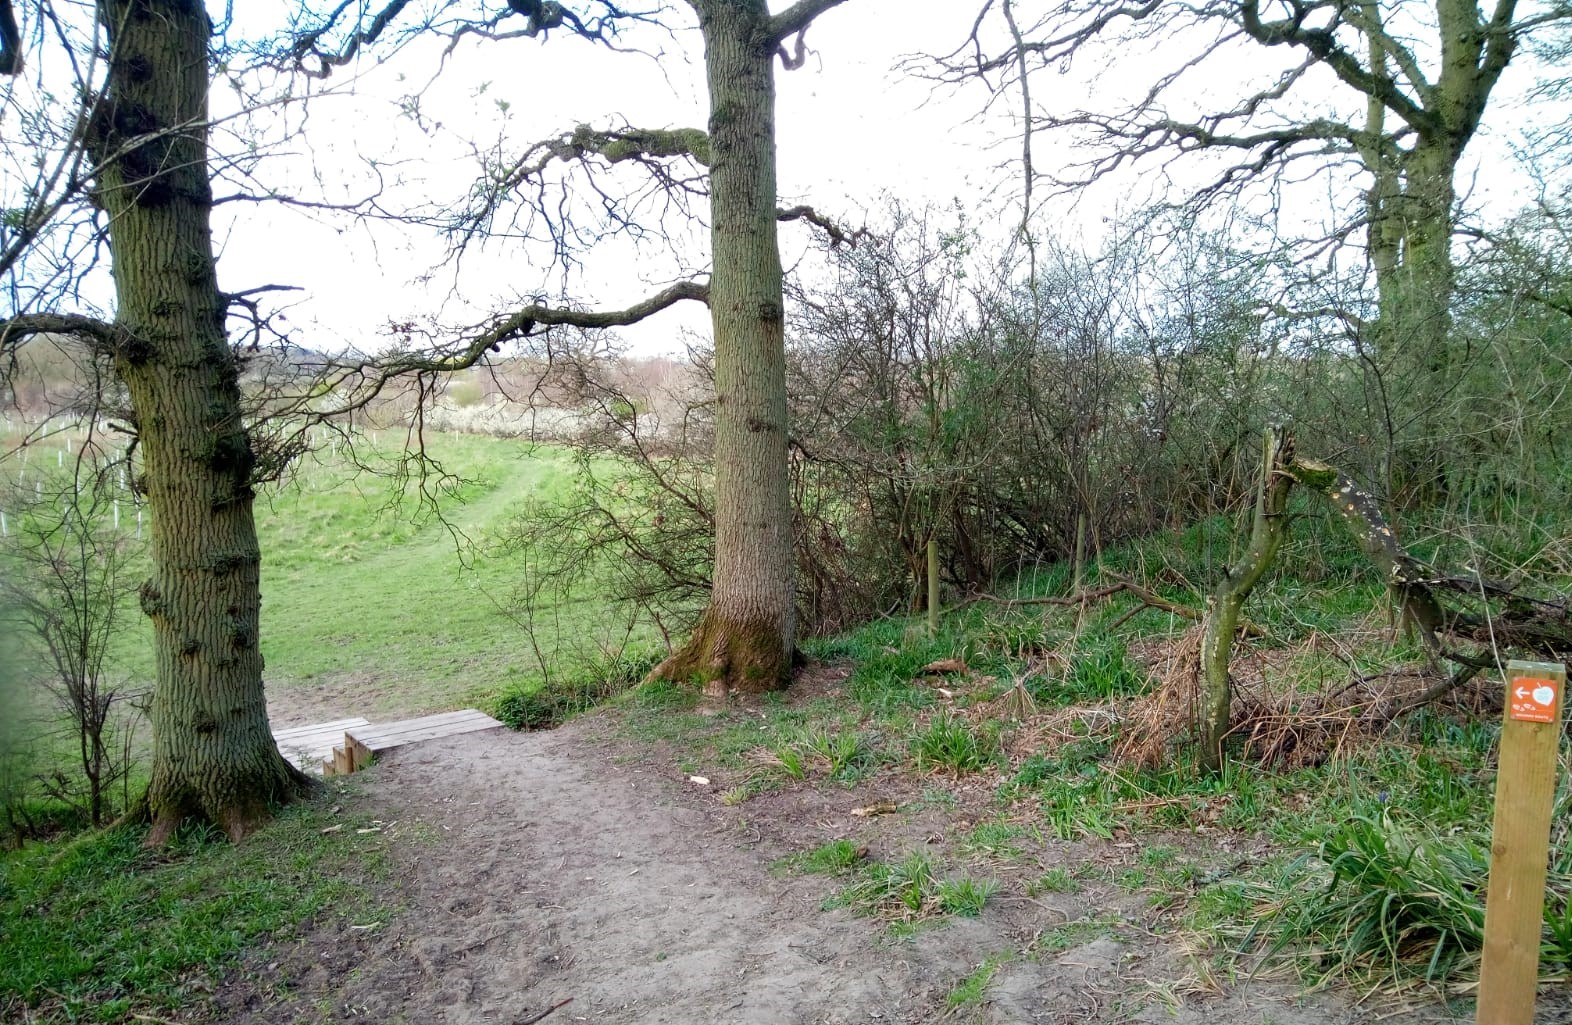 Footpath leading through trees to a set of wooden steps